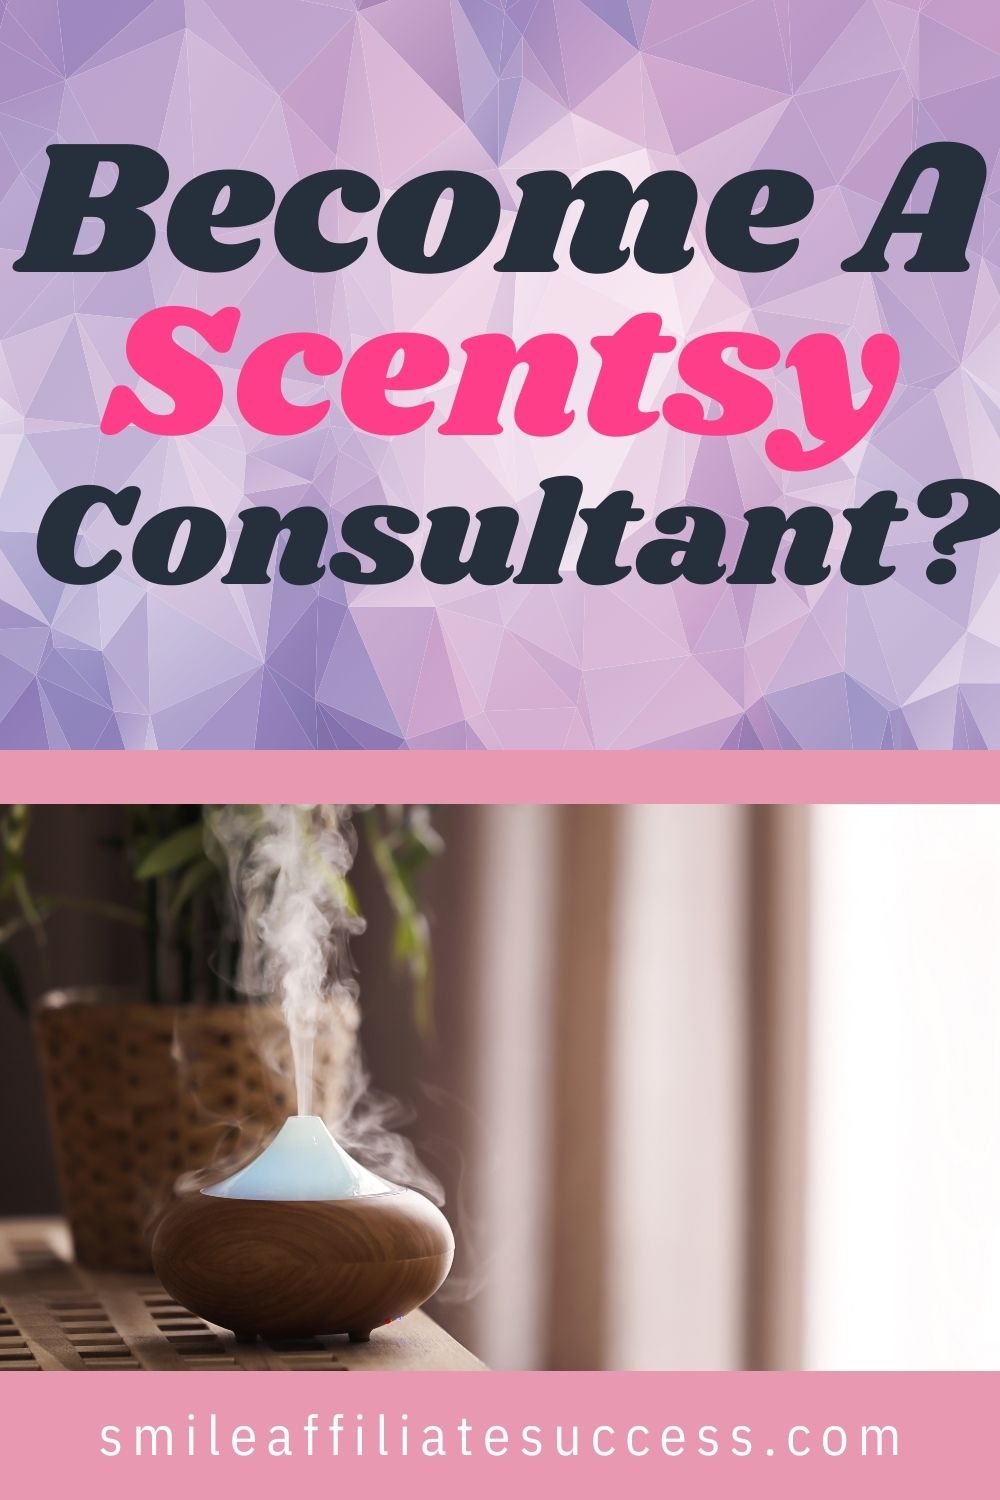 Become A Scentsy Consultant?